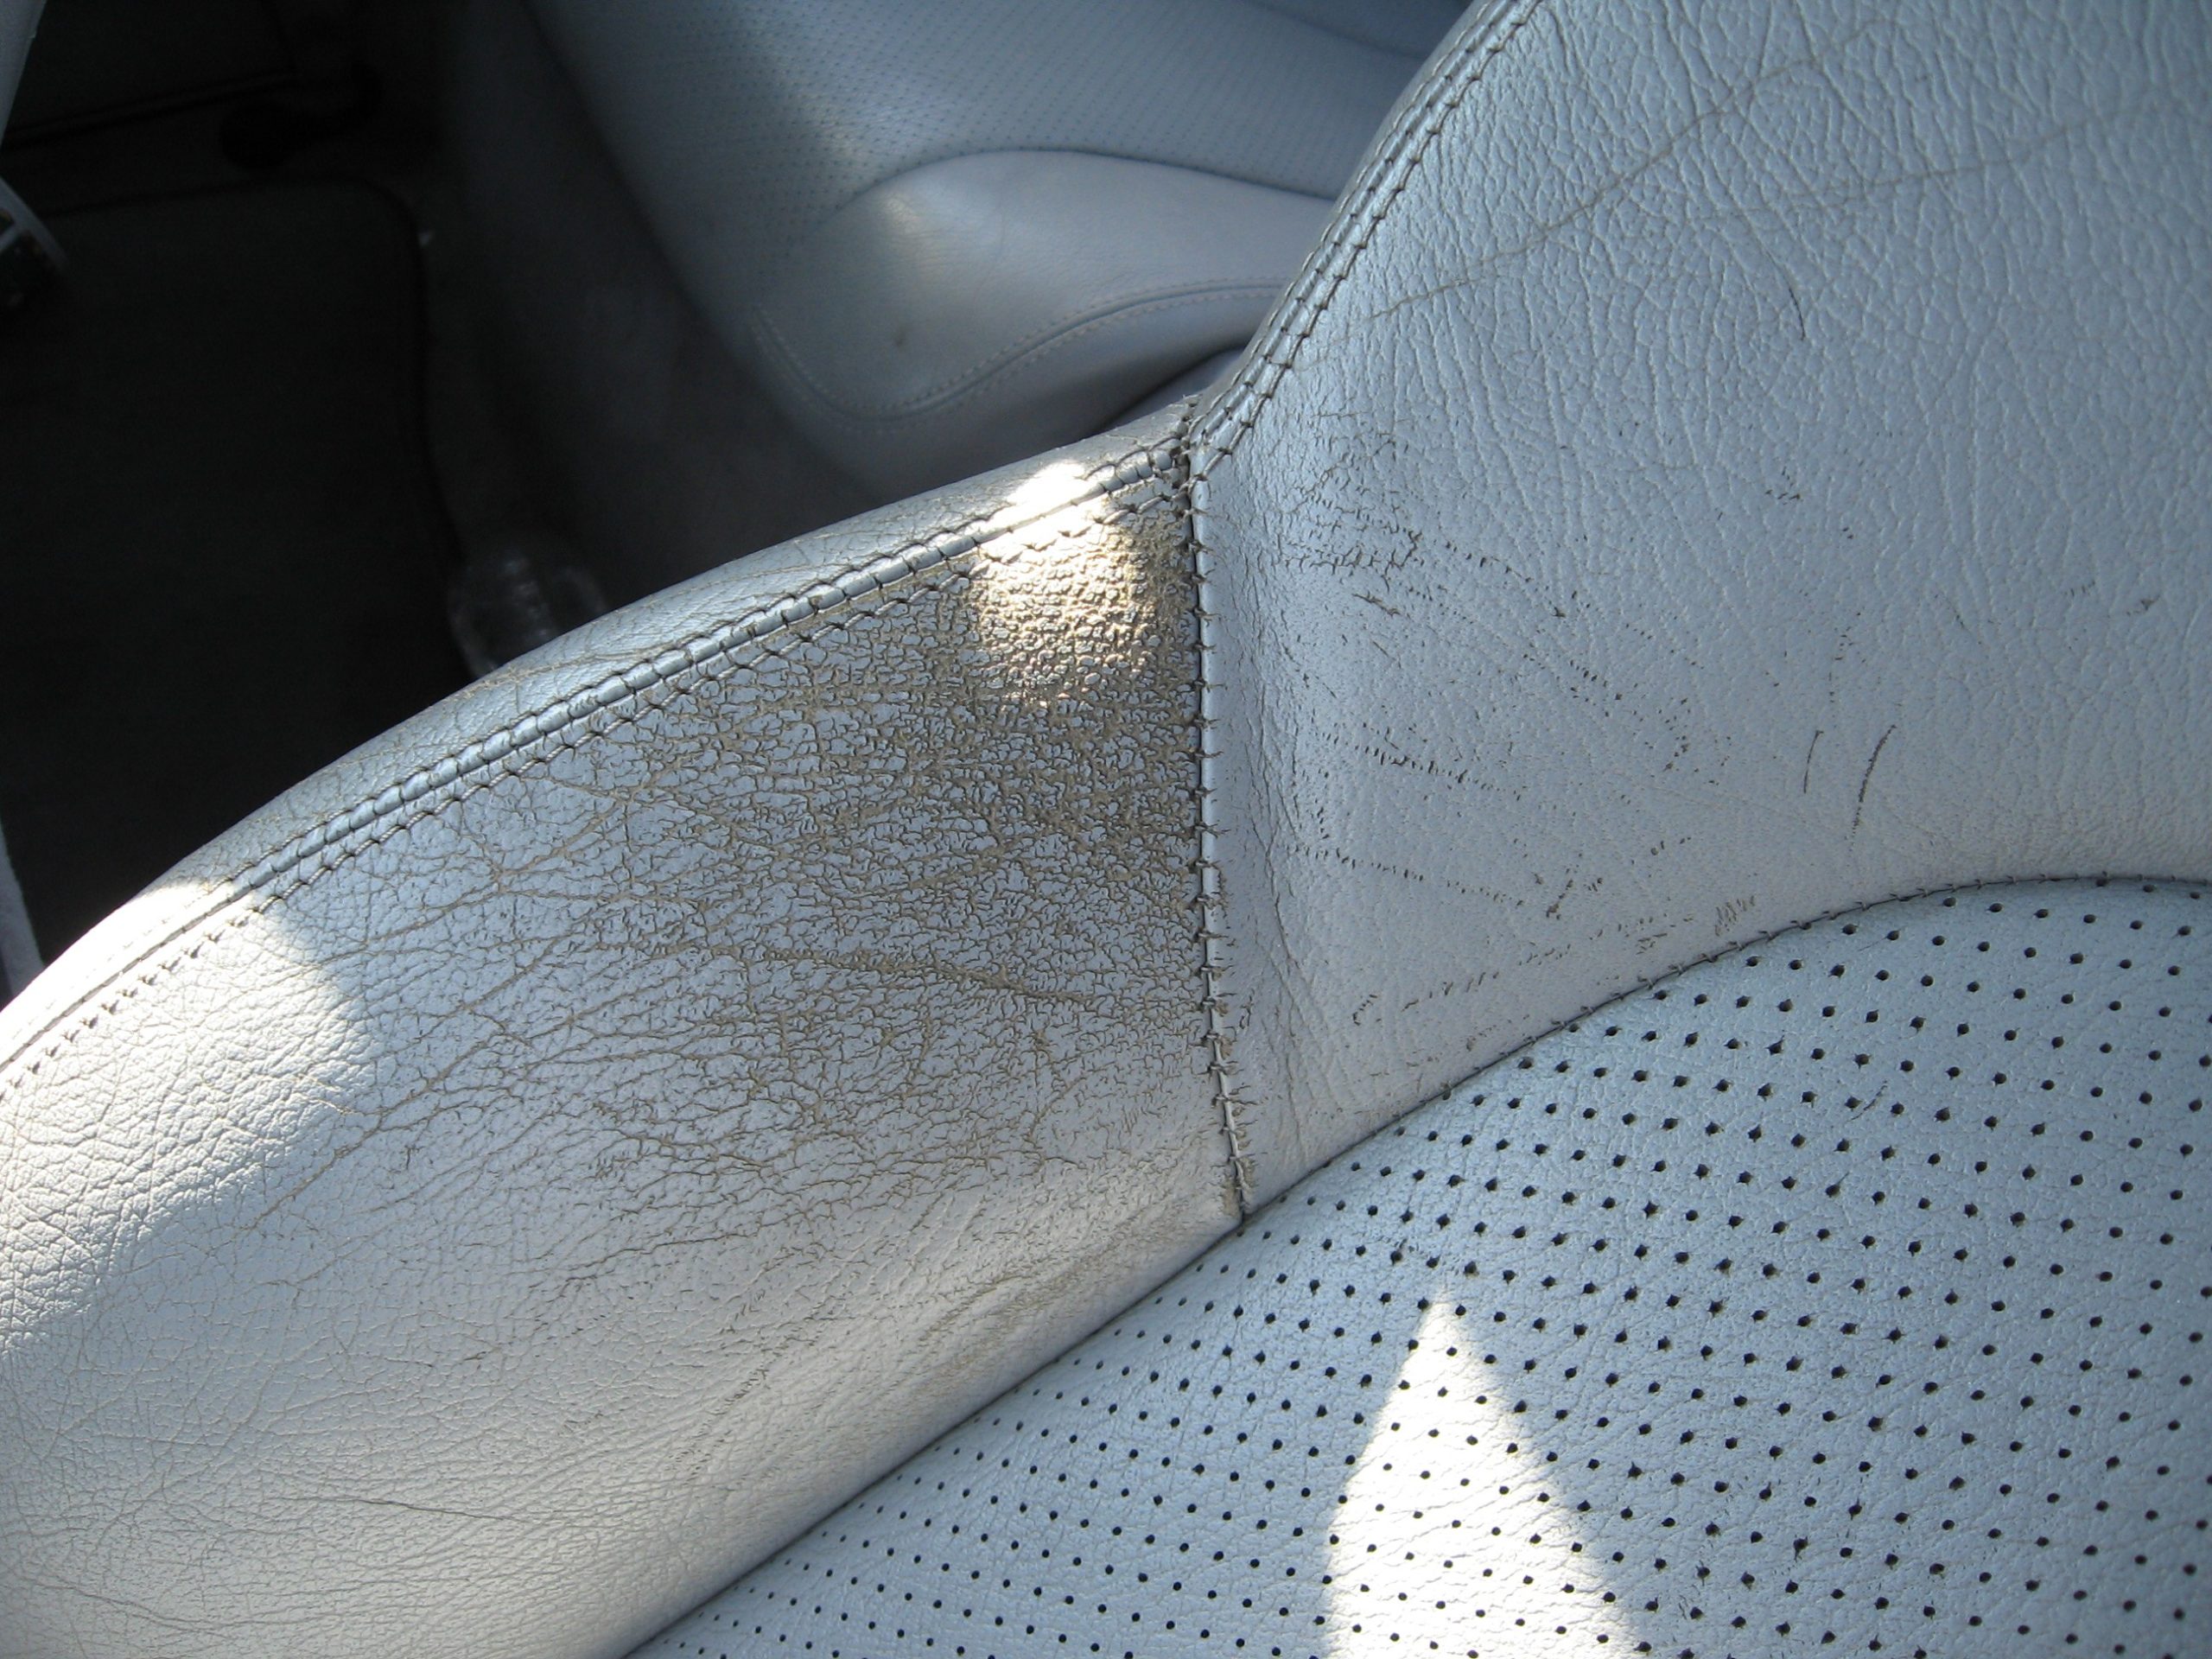 Best way to repair small gouge in leather seat? - Maintenance